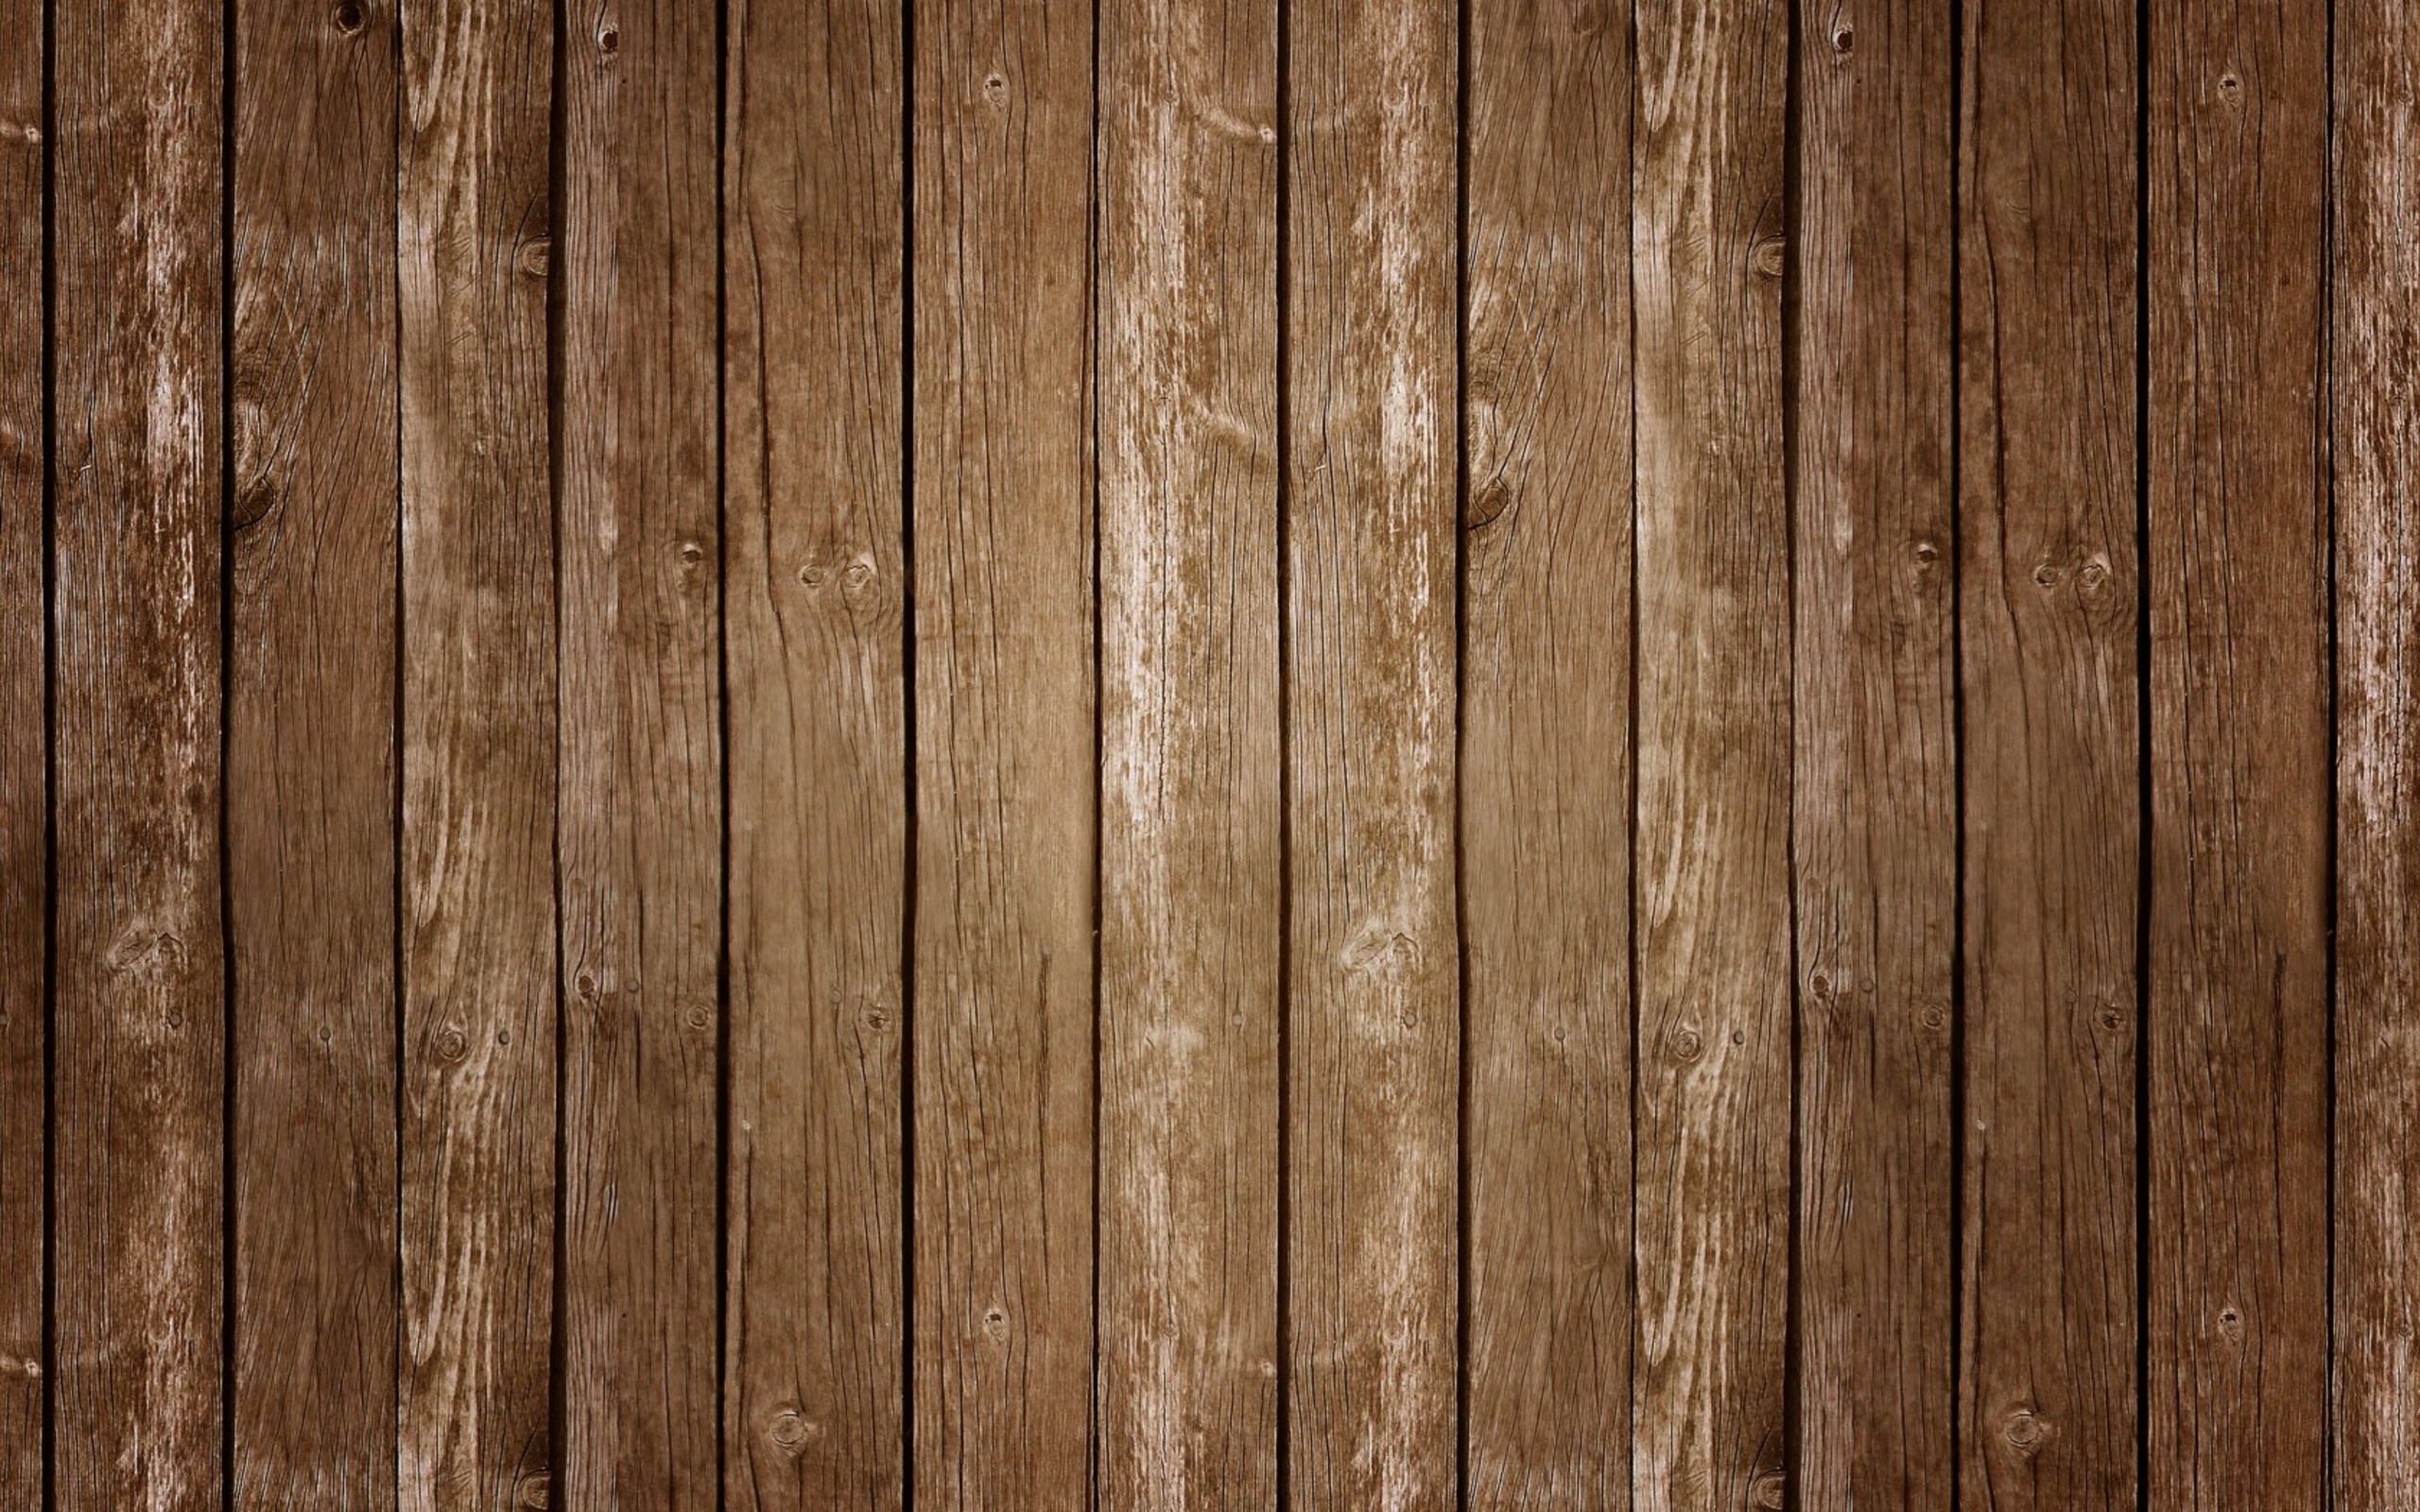 183 Wood HD Wallpapers | Background Images - Wallpaper Abyss